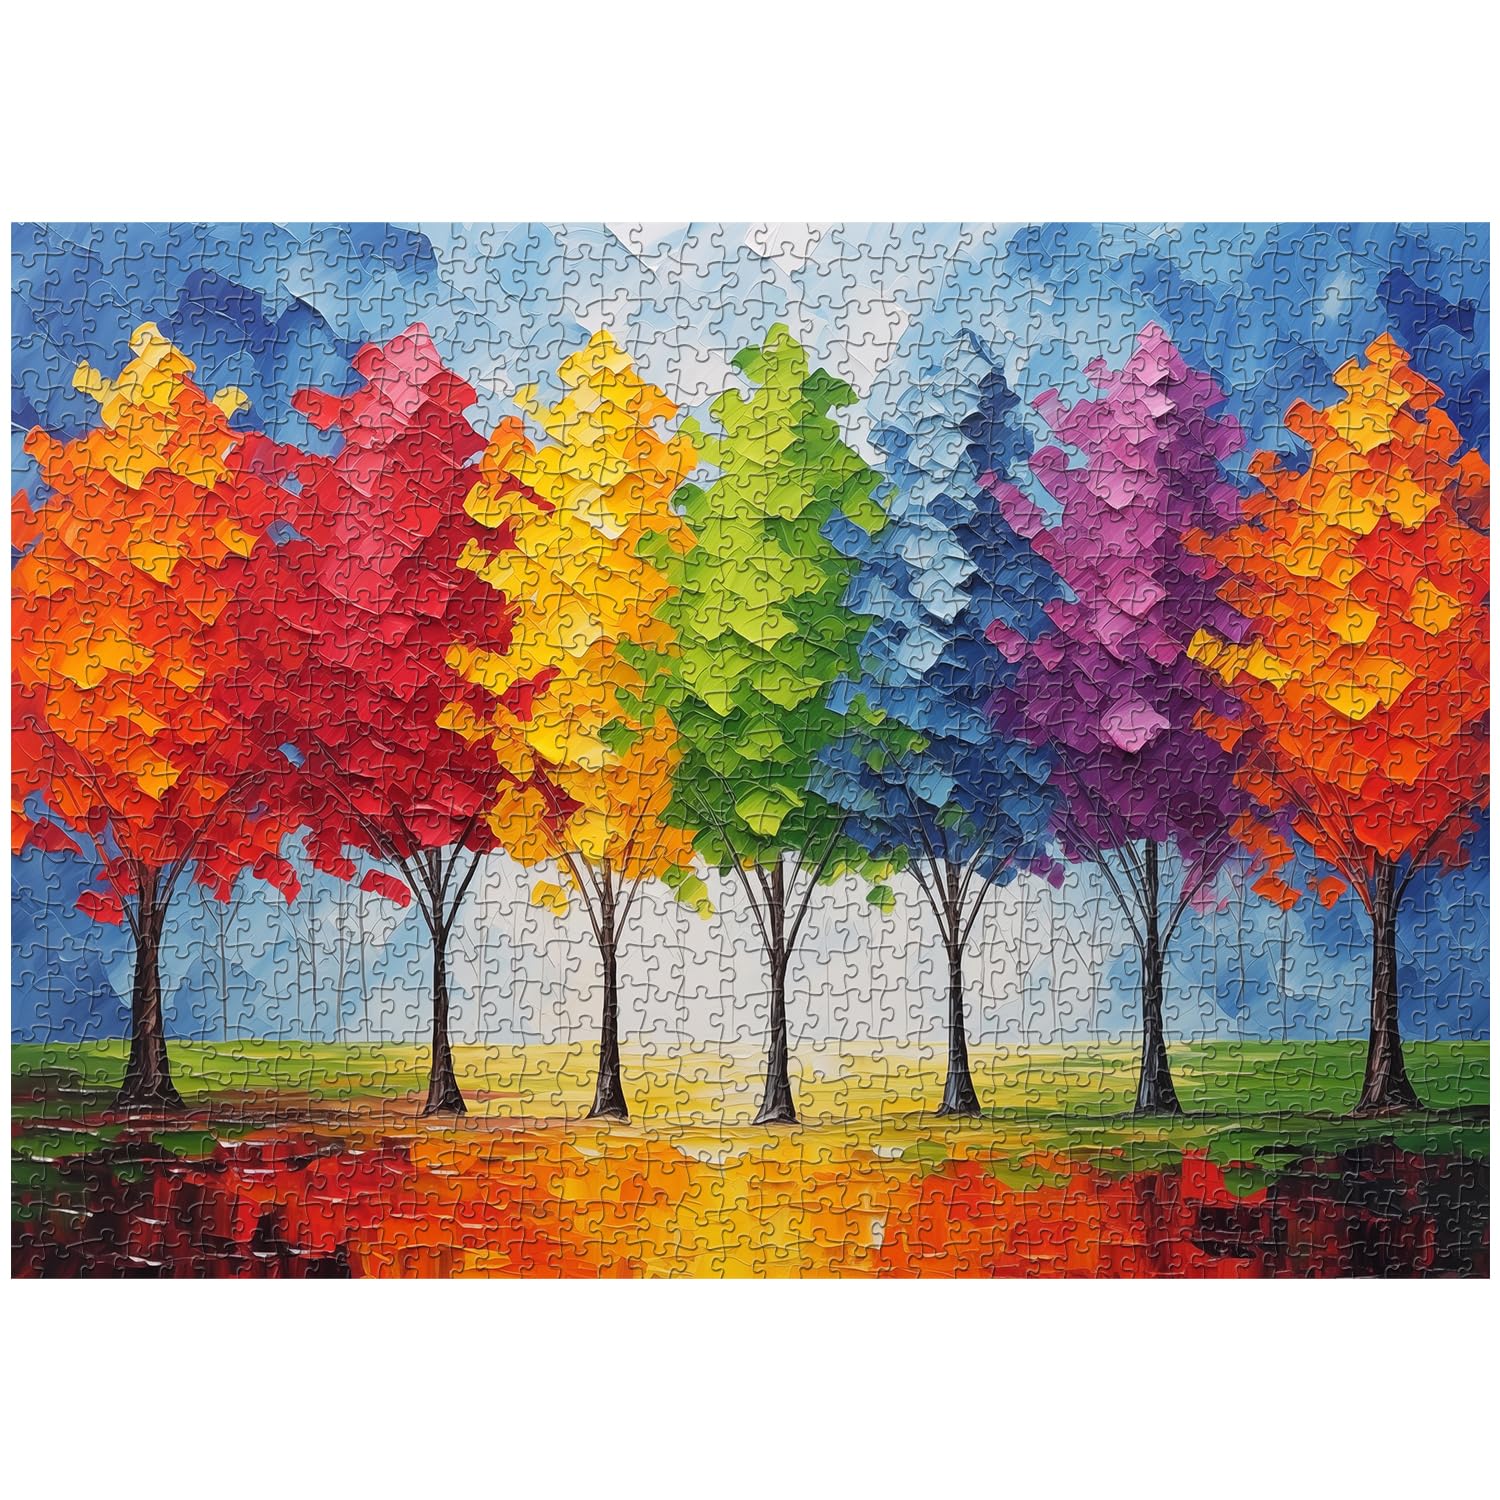 Colorful Tree Jigsaw Puzzle 1000 Pieces